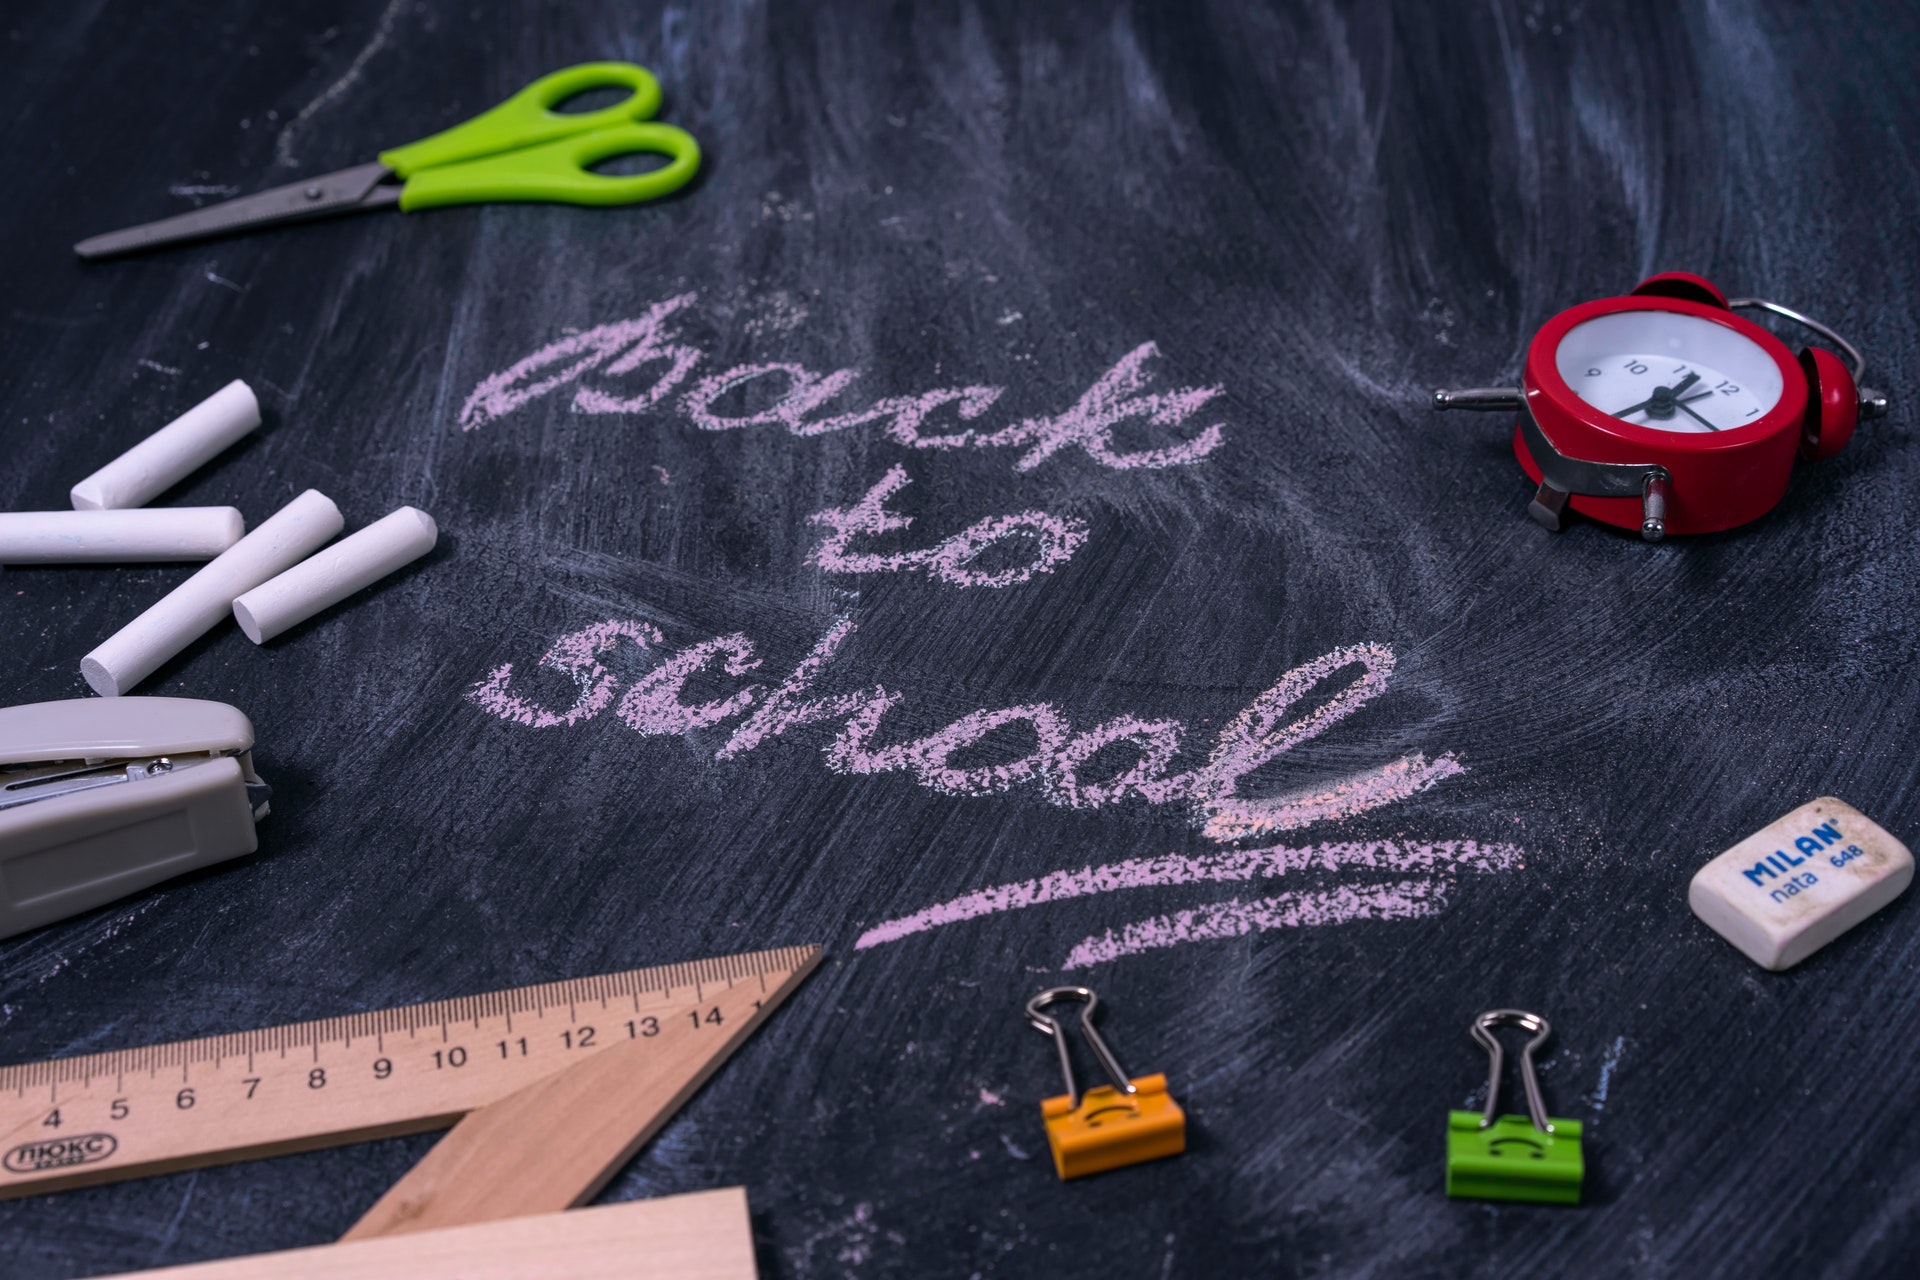 The Essential Back to School Checklist for Teachers